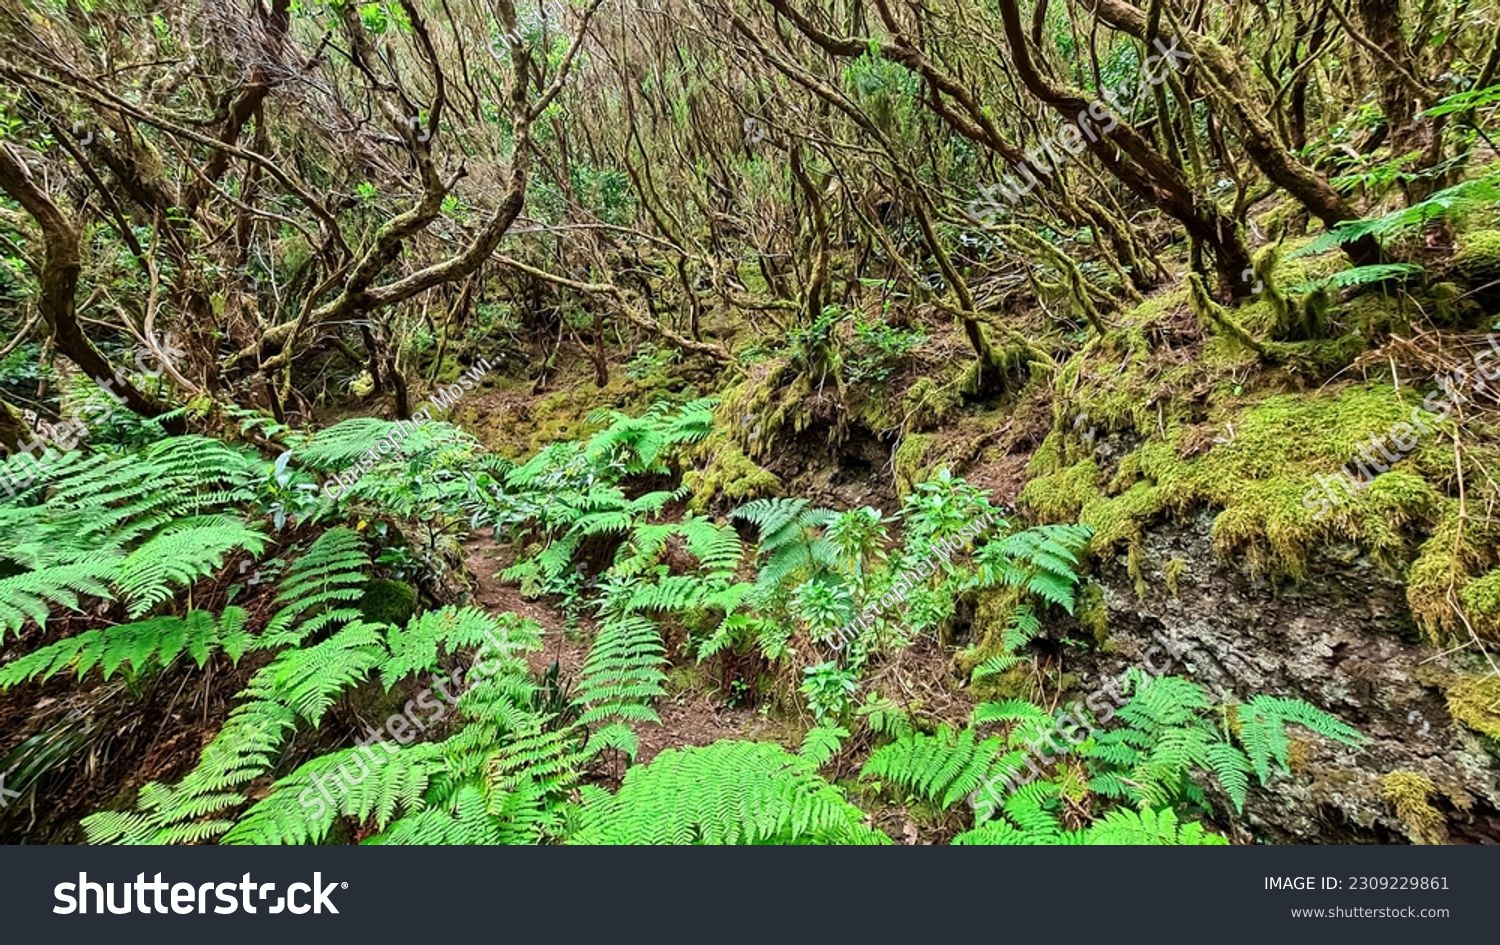 Hiking trail through enchanted ancient laurel sub tropical forest in the Anaga mountain range on Tenerife, Canary Islands, Spain, Europe, EU. Dense diversified fauna. Path overgrown with moss and fern #2309229861